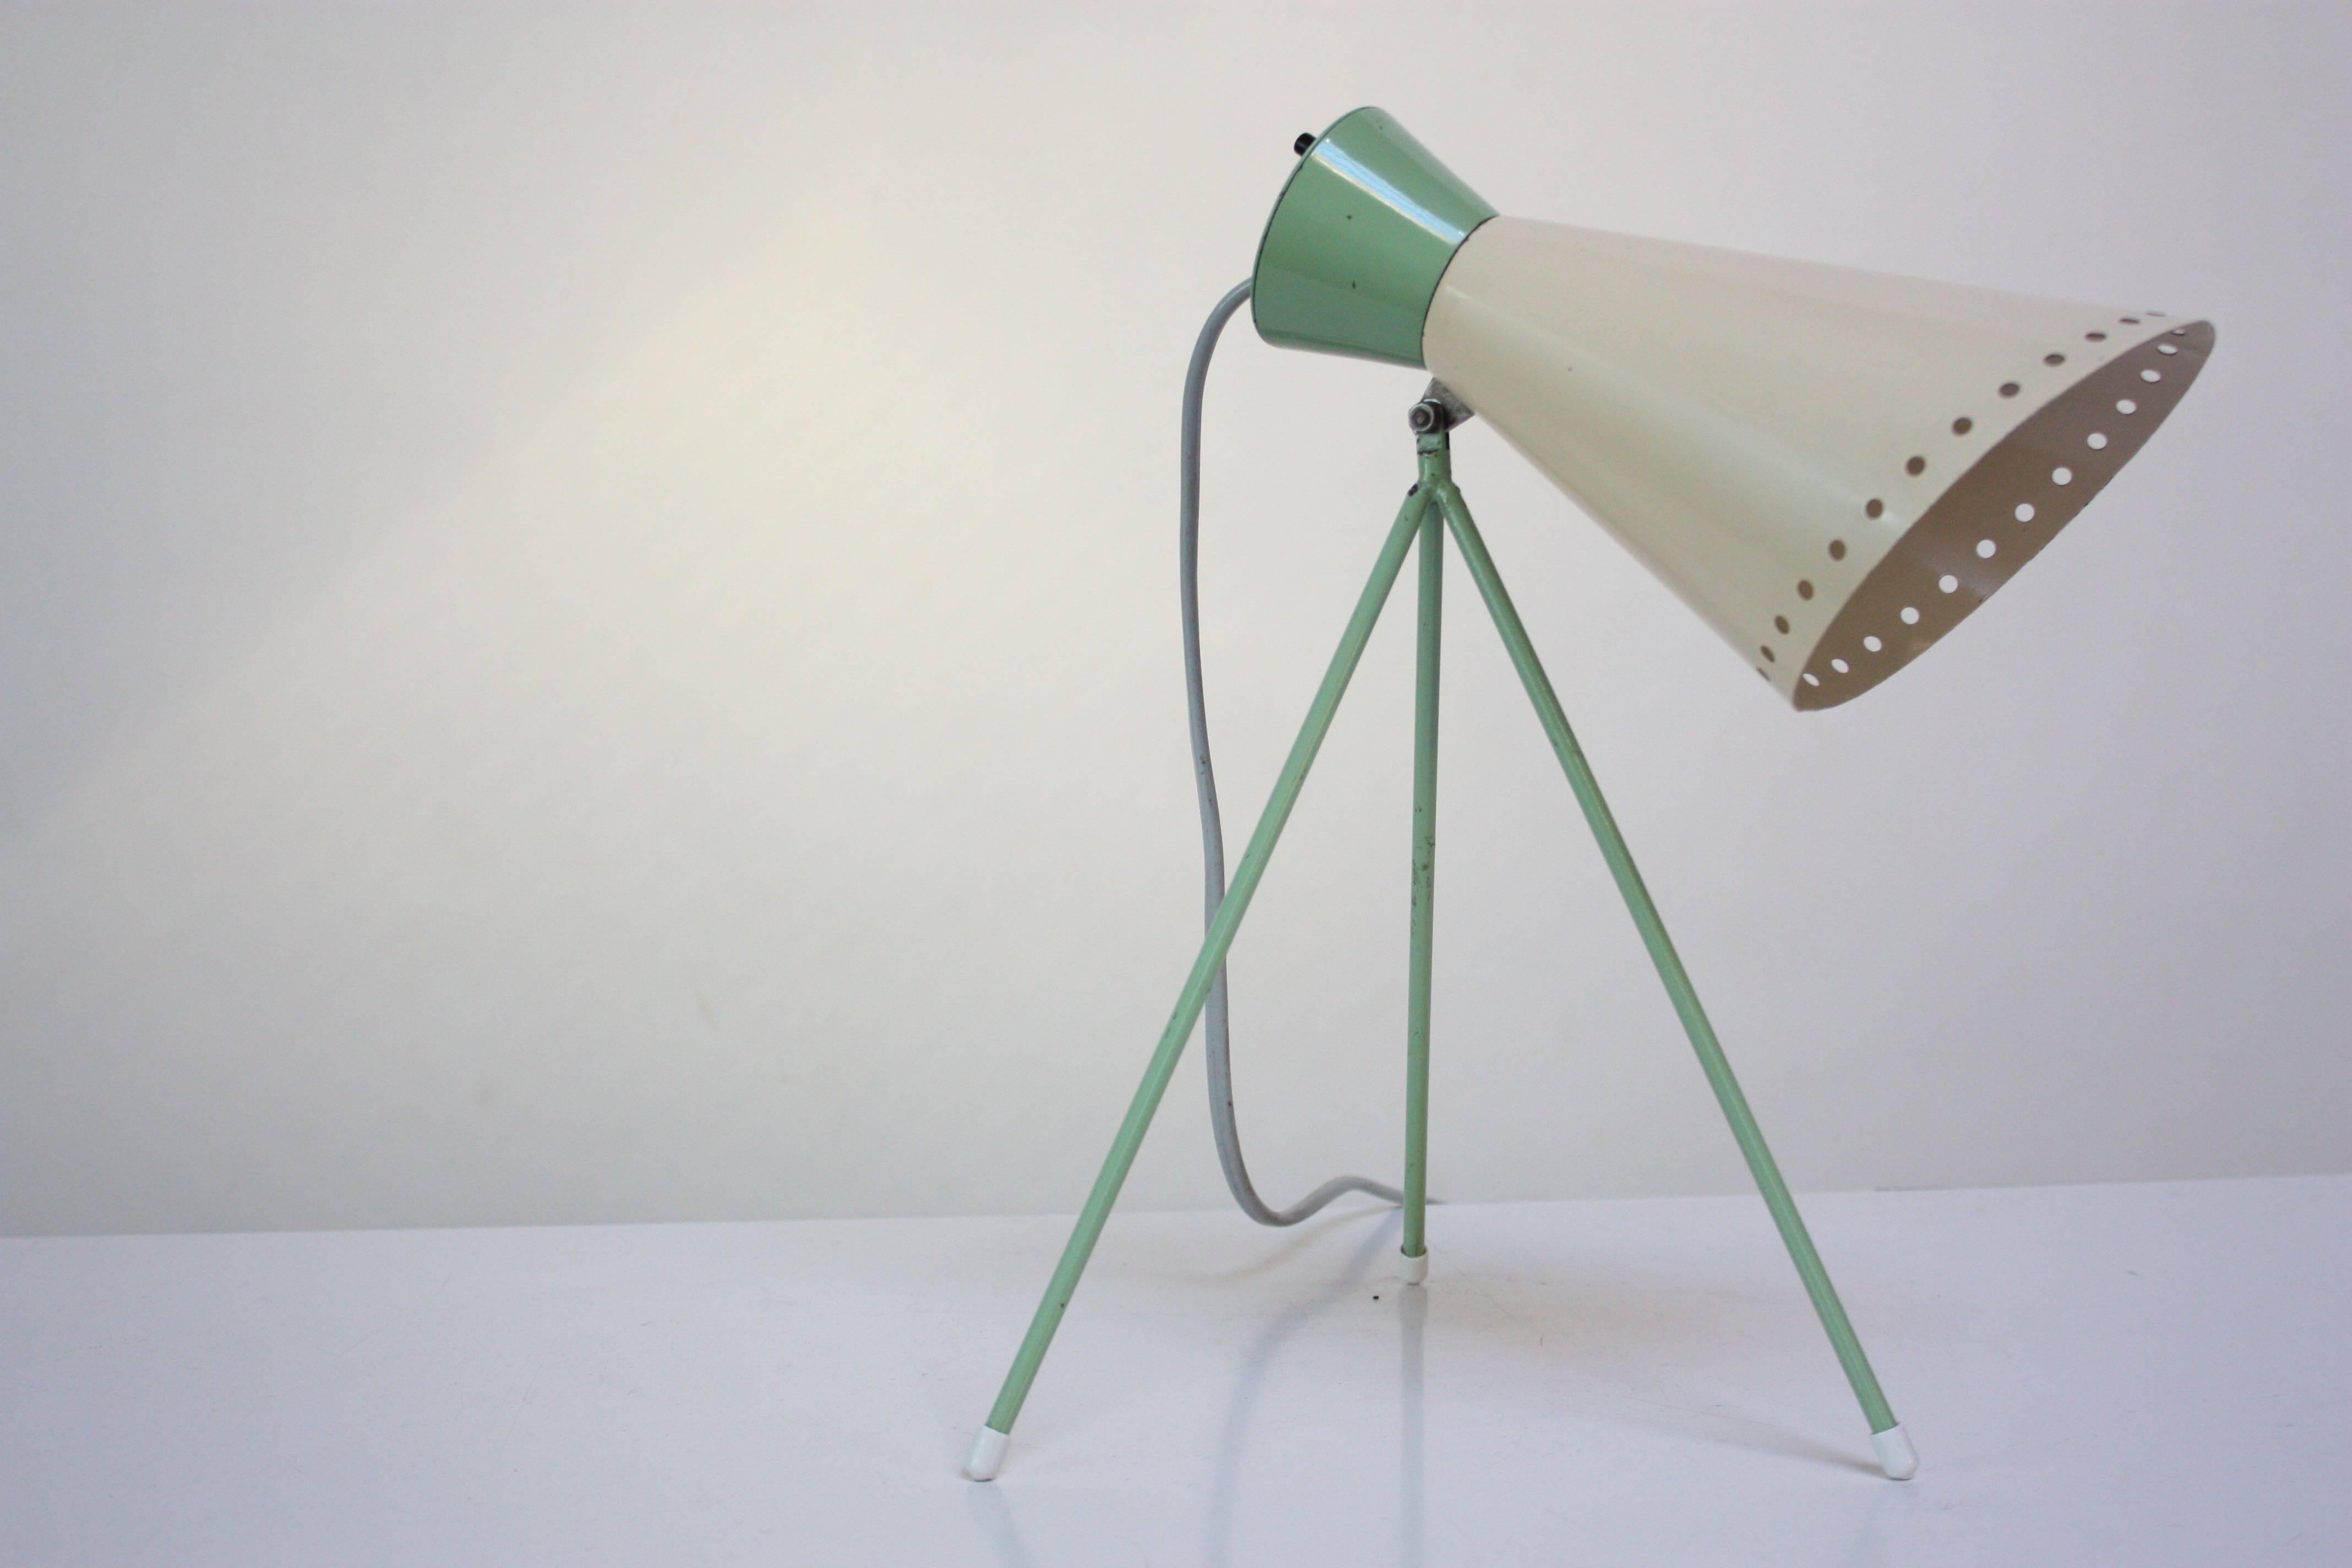 Czech table lamp designed in 1958 by Josef Hurka for Napako. Rare and early light mint green enameled tripod base with off-white perforated metal shade, which is fully adjustable. Remarkable, original condition with only faint wear. 
Single E14